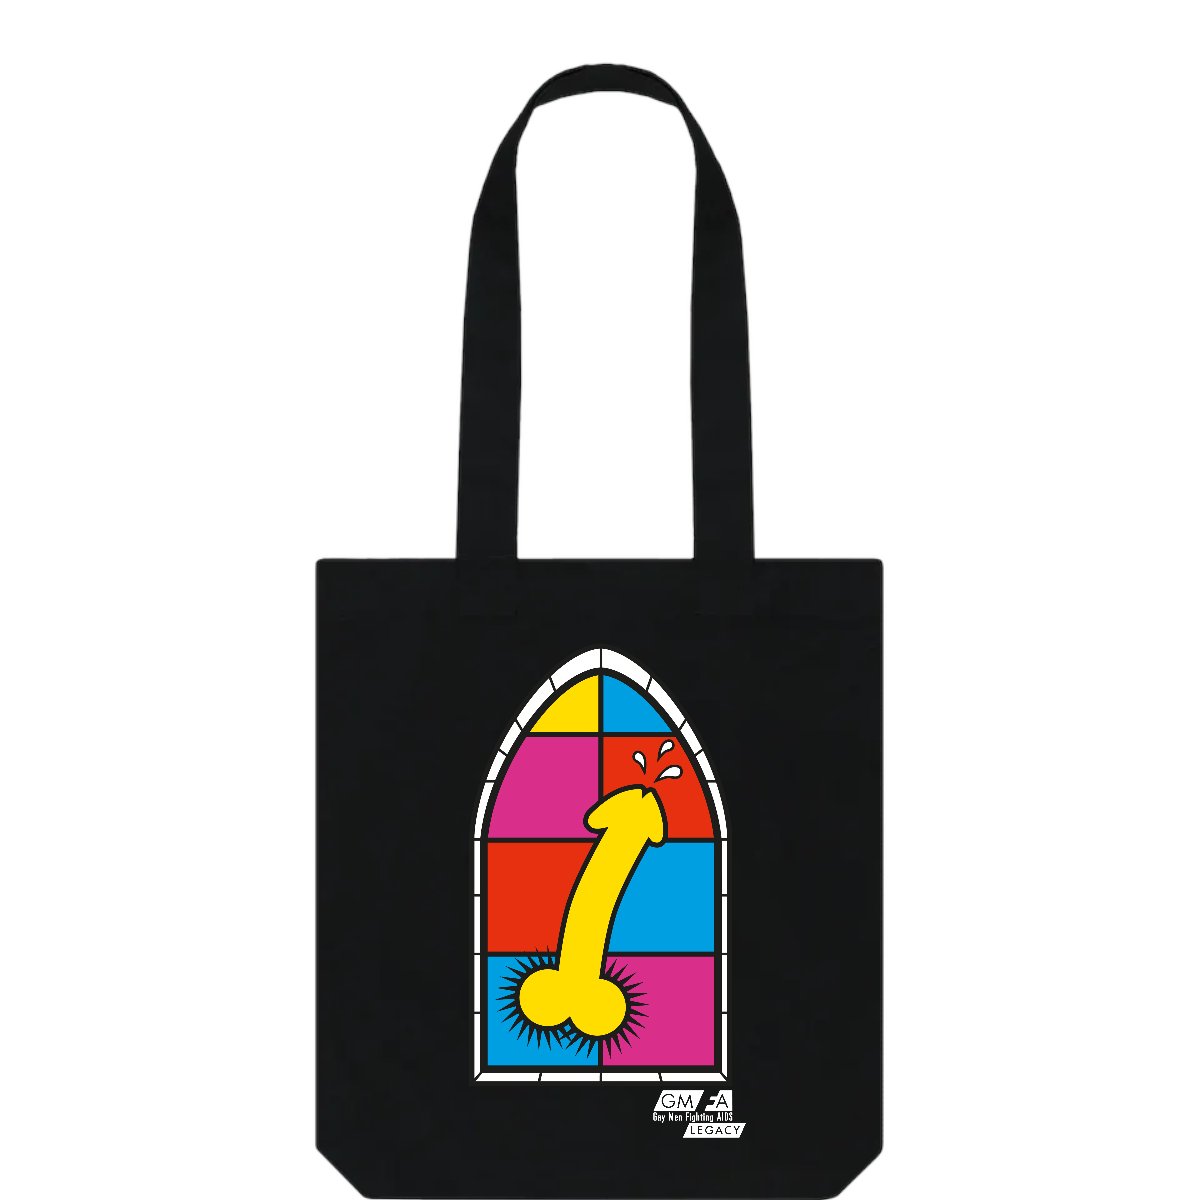 Did you know you can buy amazing GMFA merch and the profits go towards @lgbthero's HIV work? Check out the 'Stained Glass' line based on our classic 'The Rules' leaflet from 2001. You can view the full collection here: lgbt-hero.teemill.com/collection/gmf… #LGBTHM24 #LGBTHM